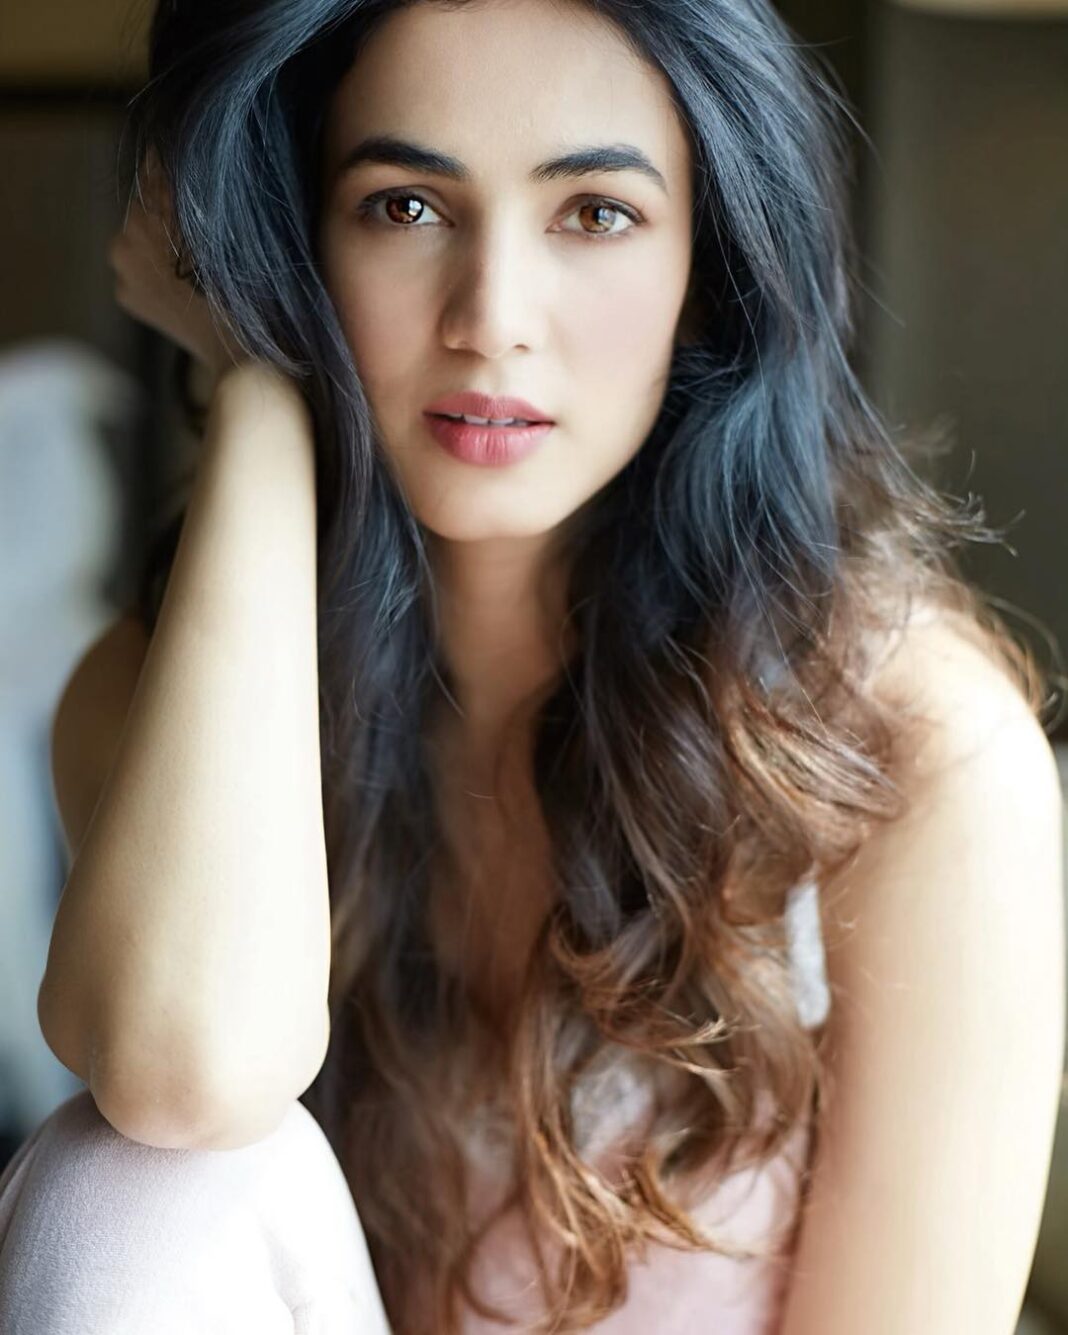 Sonal Chauhan Instagram - The beginning of magic 🌸💫🌸💫 . . . . . #eyes #magic #beginning #love #thebeginningofmagic #faith #loveaboveall #thoughts #reflection #mirror #portraitphotography #mondaymornings #monday